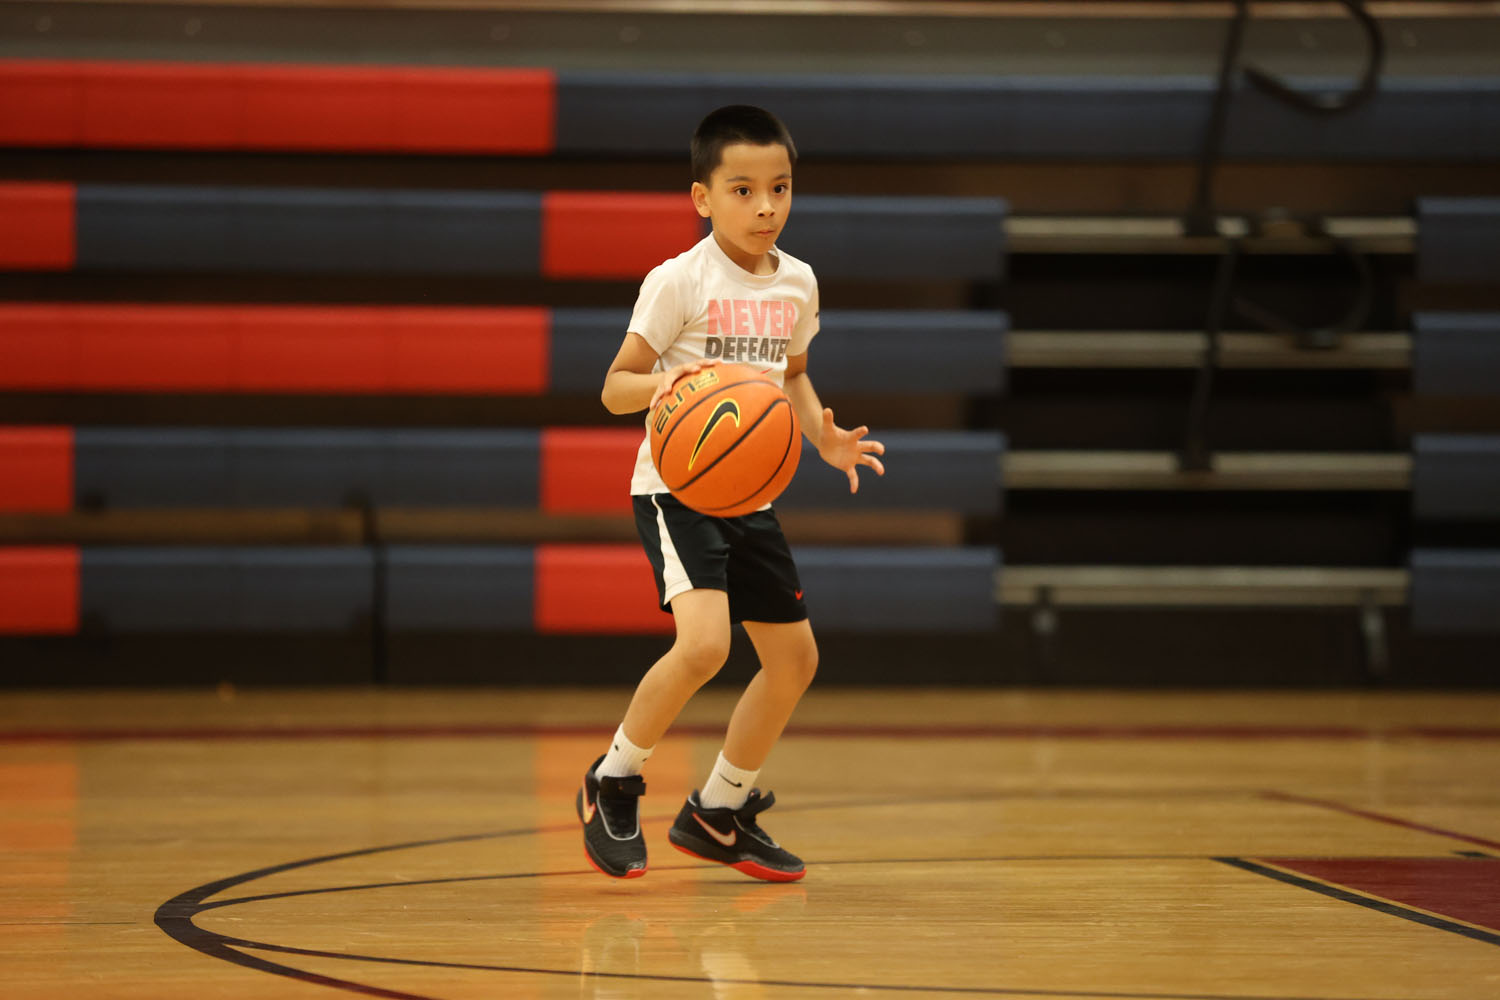 Young camper dribbling down the court